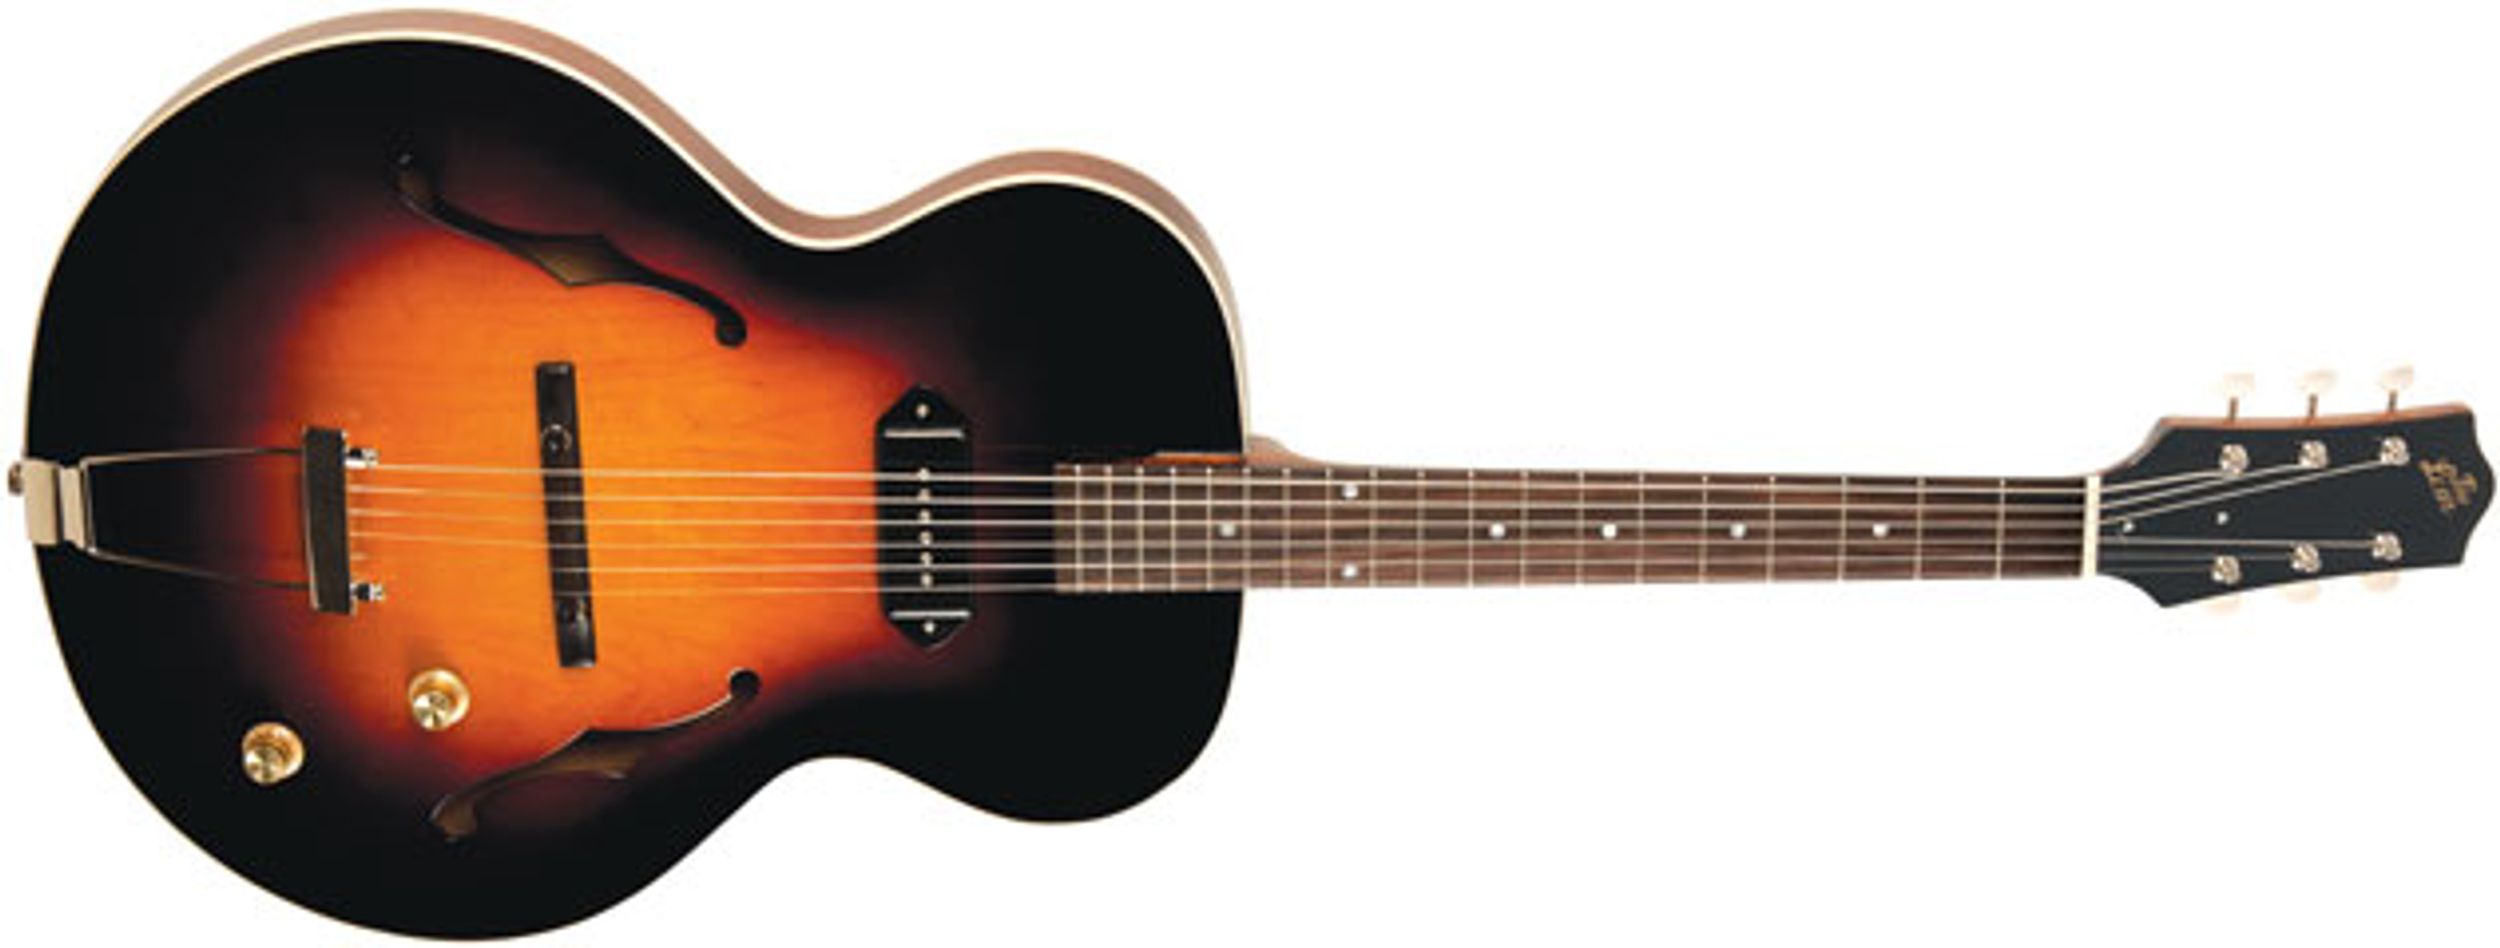 The Loar Introduces the LH-301T Thinbody Archtop